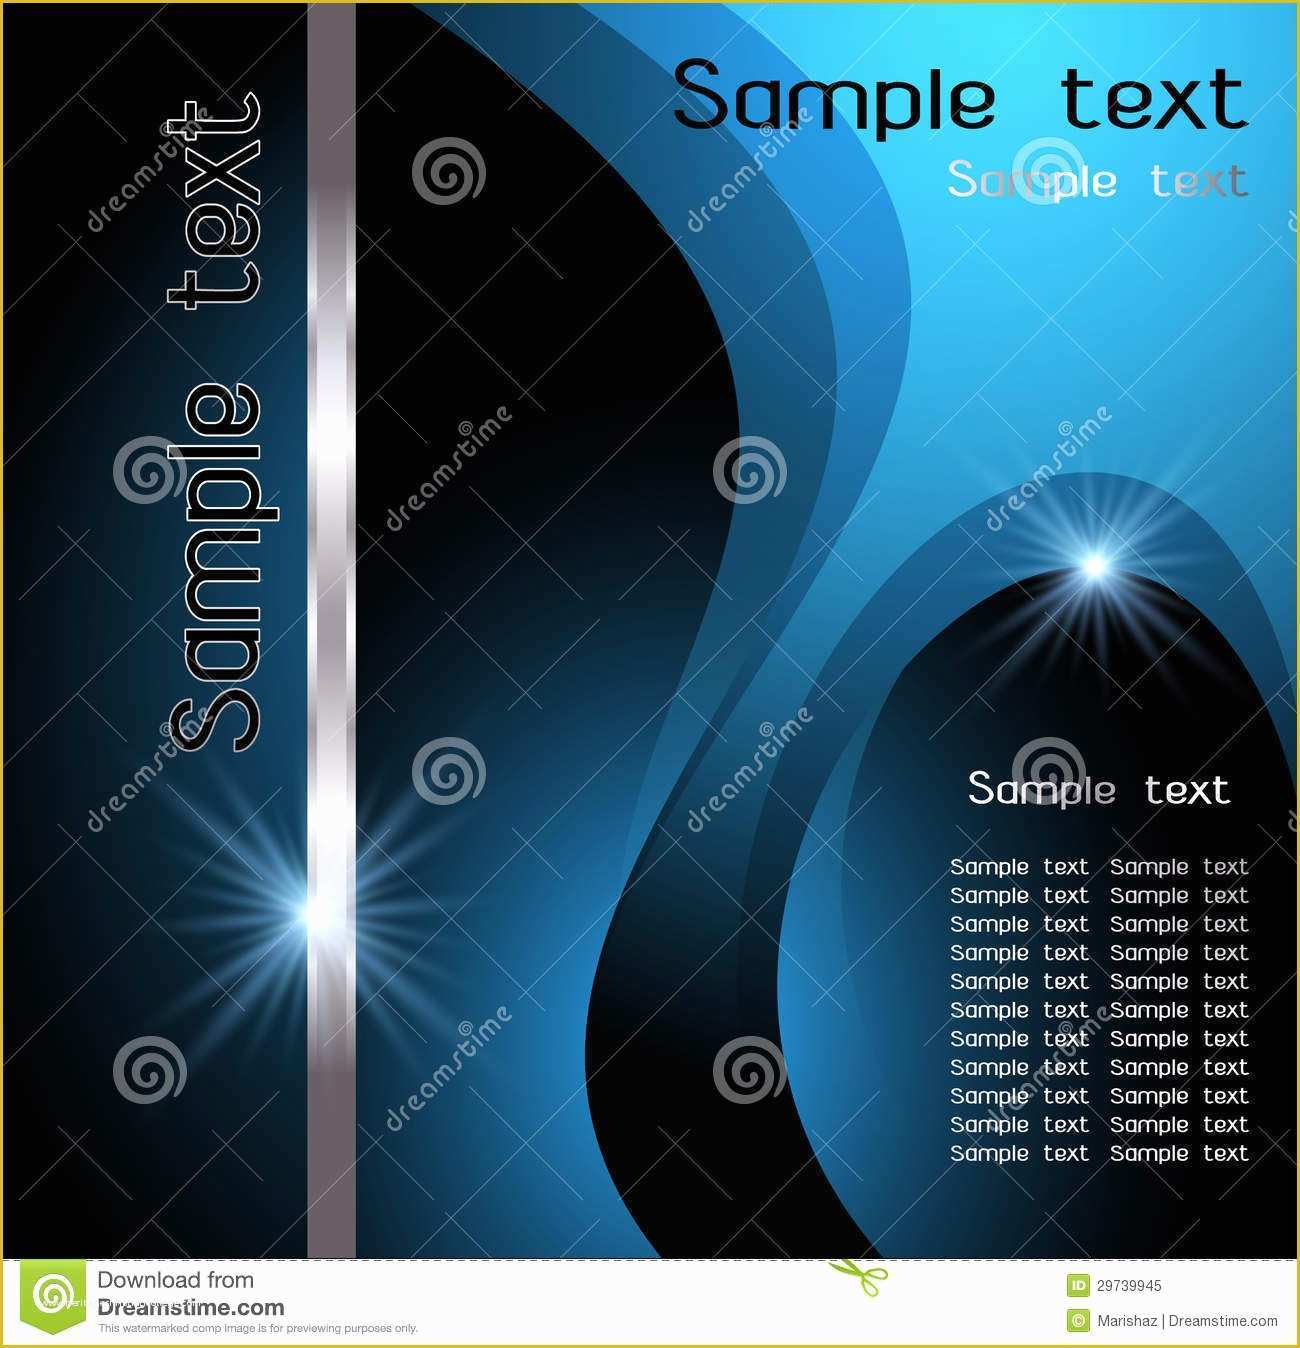 Royalty Free Flyer Templates Of Business Flyer Royalty Free Stock Image